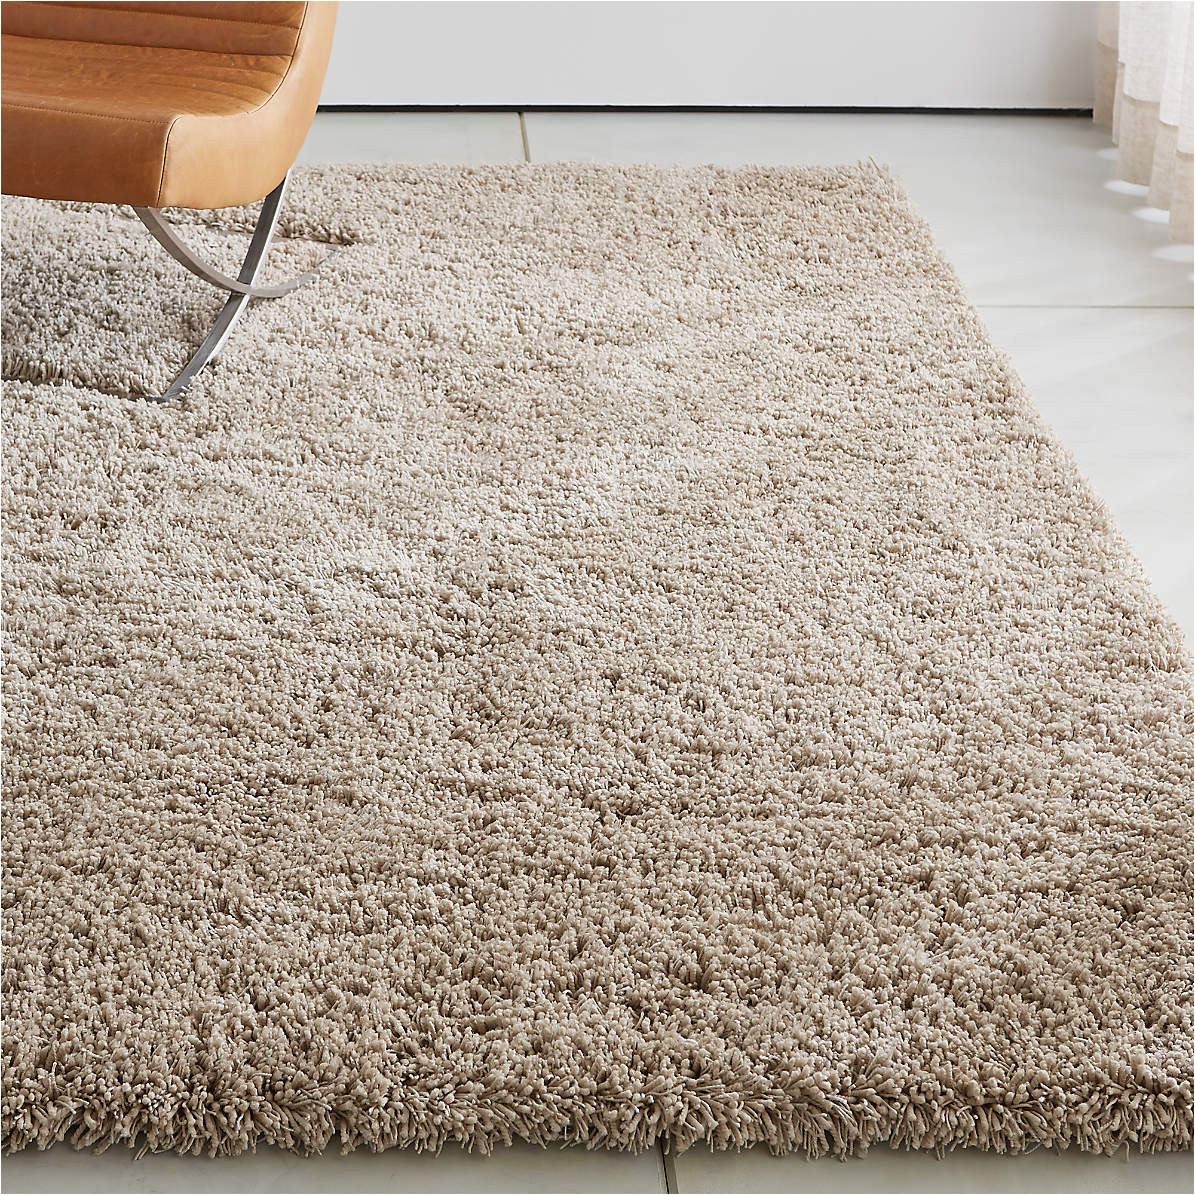 Crate and Barrel Round area Rugs Memphis Stone Natural Shag area Rug Crate & Barrel